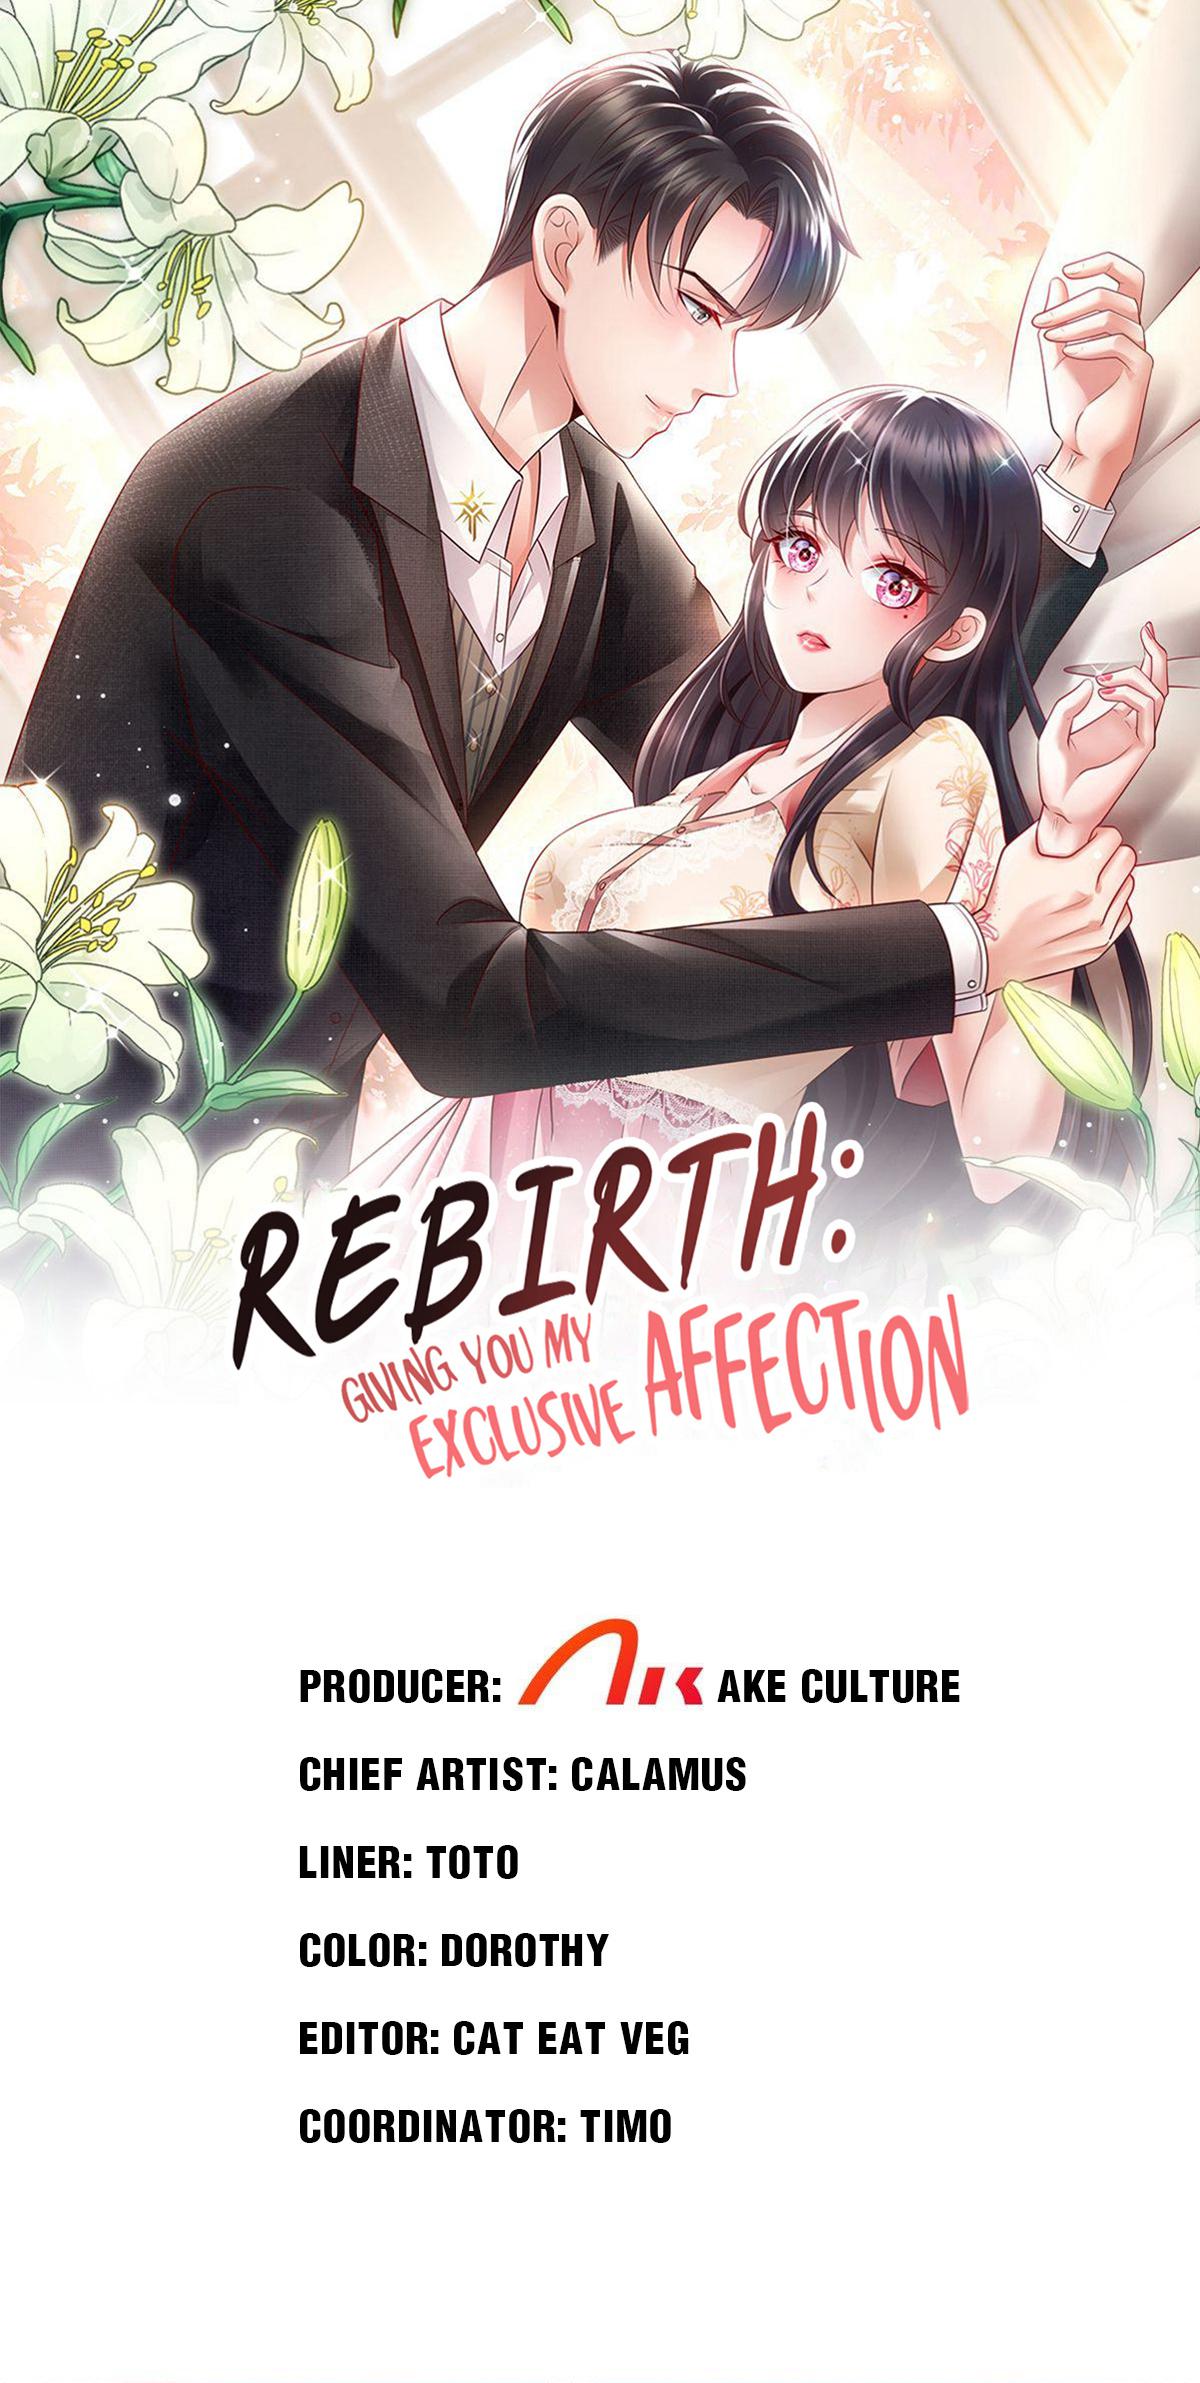 Rebirth: Giving You My Exclusive Affection 188